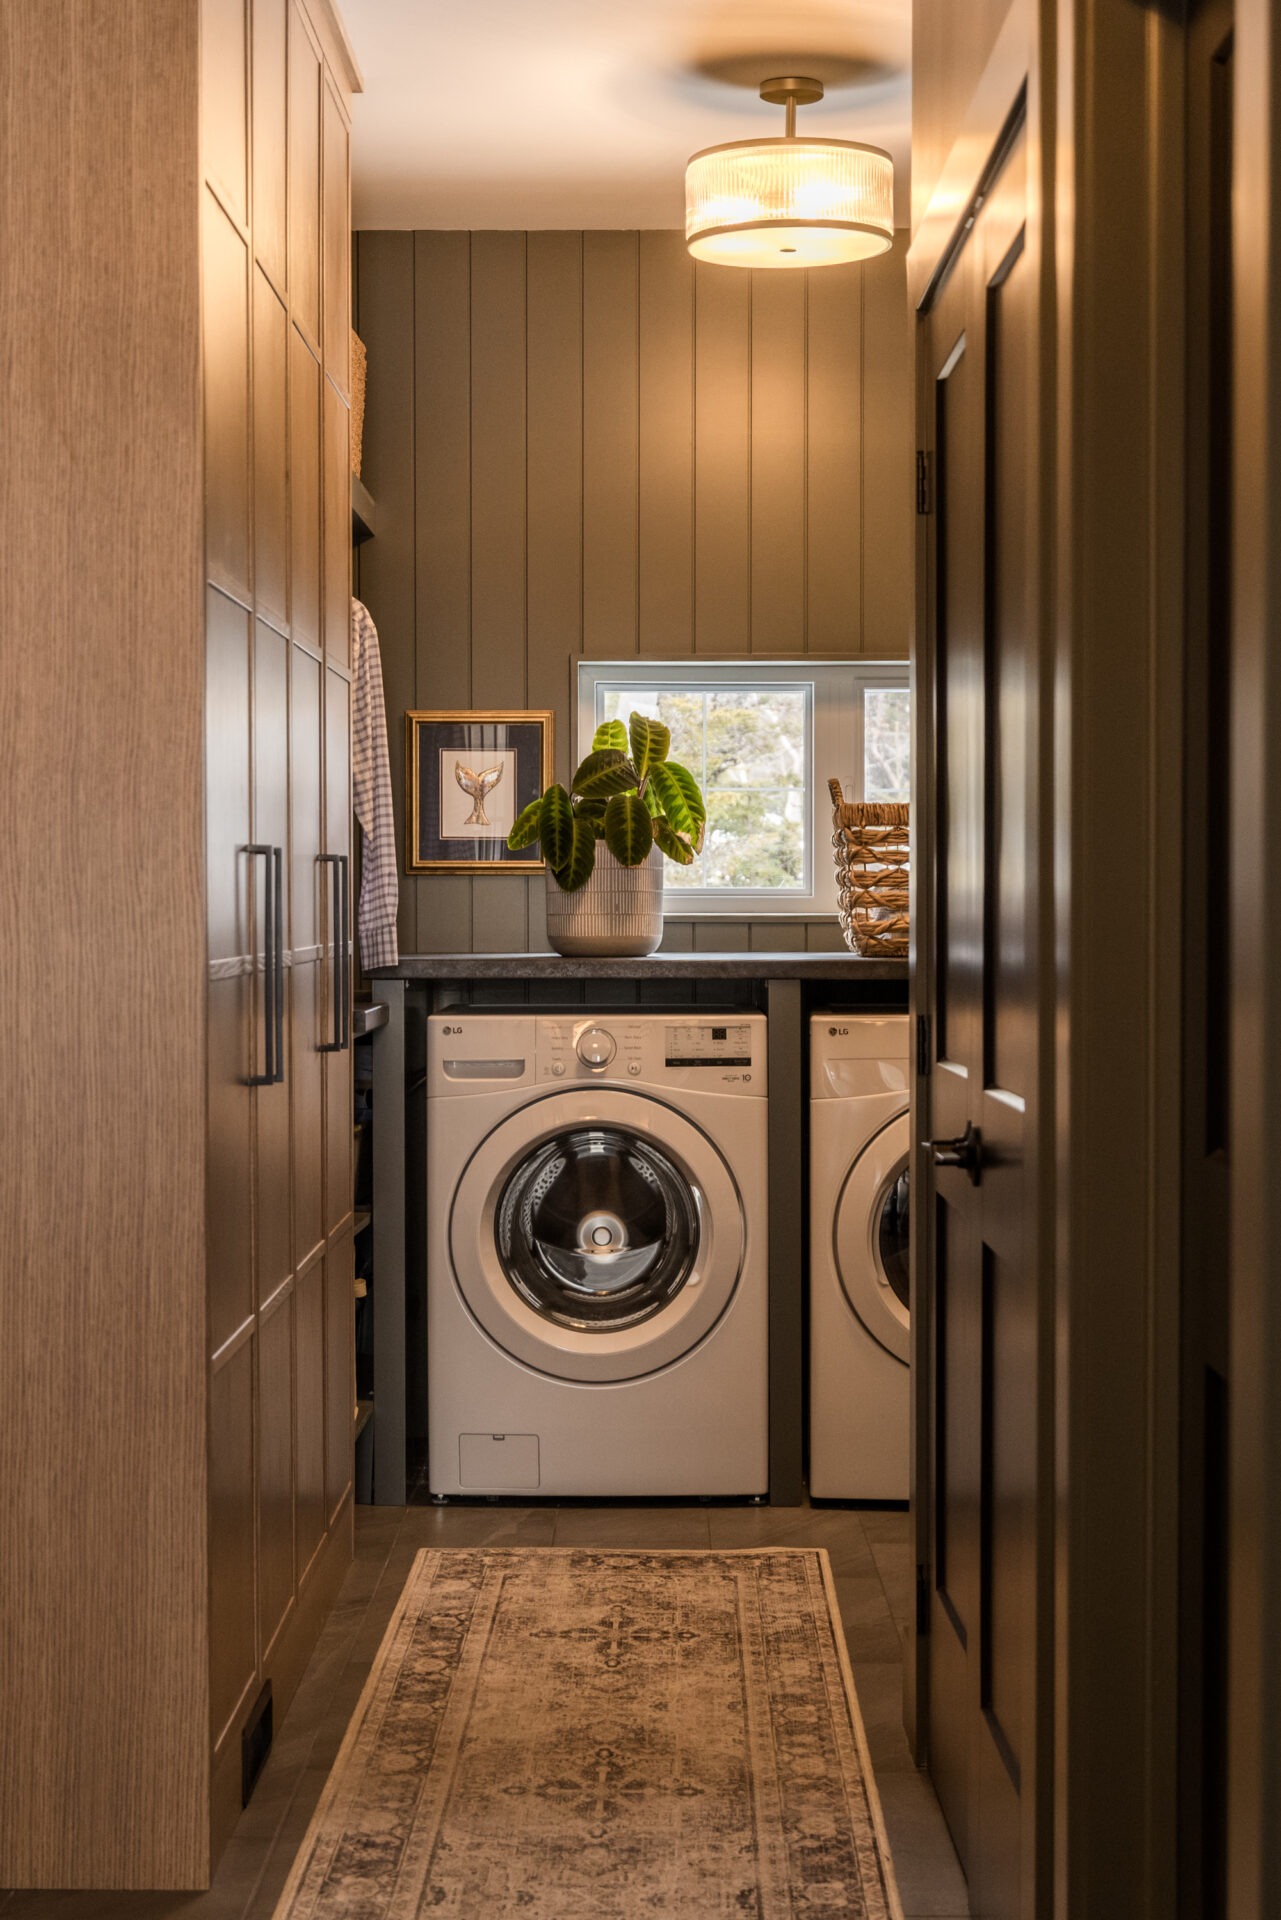 A cozy laundry room with a front-loading washer and dryer, wooden cabinetry, a patterned rug, pendant light, and a window with greenery outside.